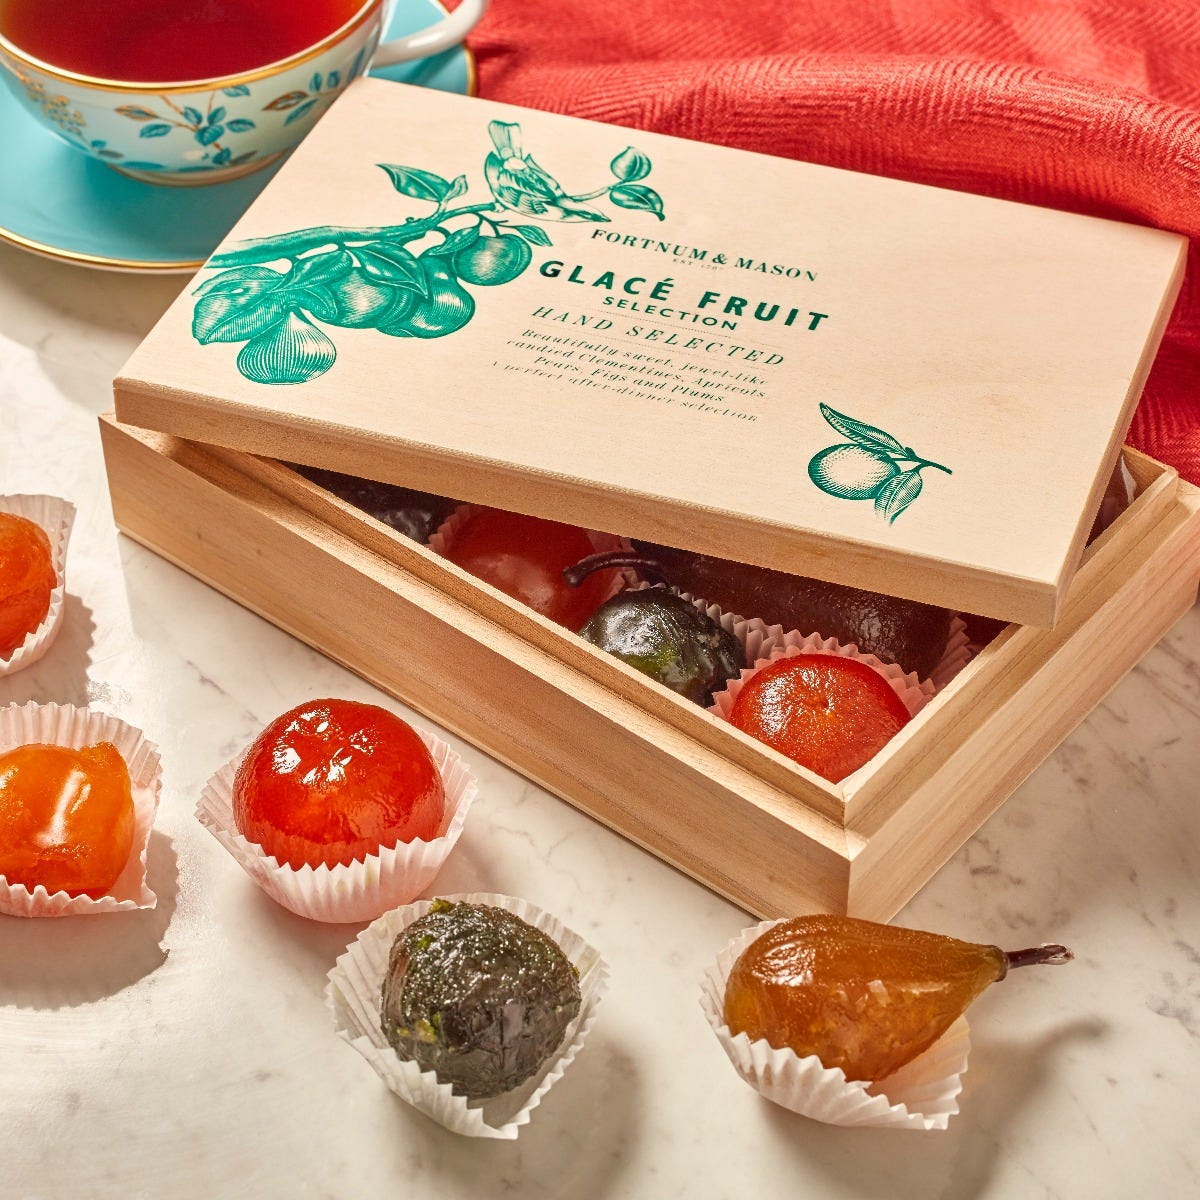 Glacé Fruits Selection in Wooden Box, 400g, Fortnum & Mason